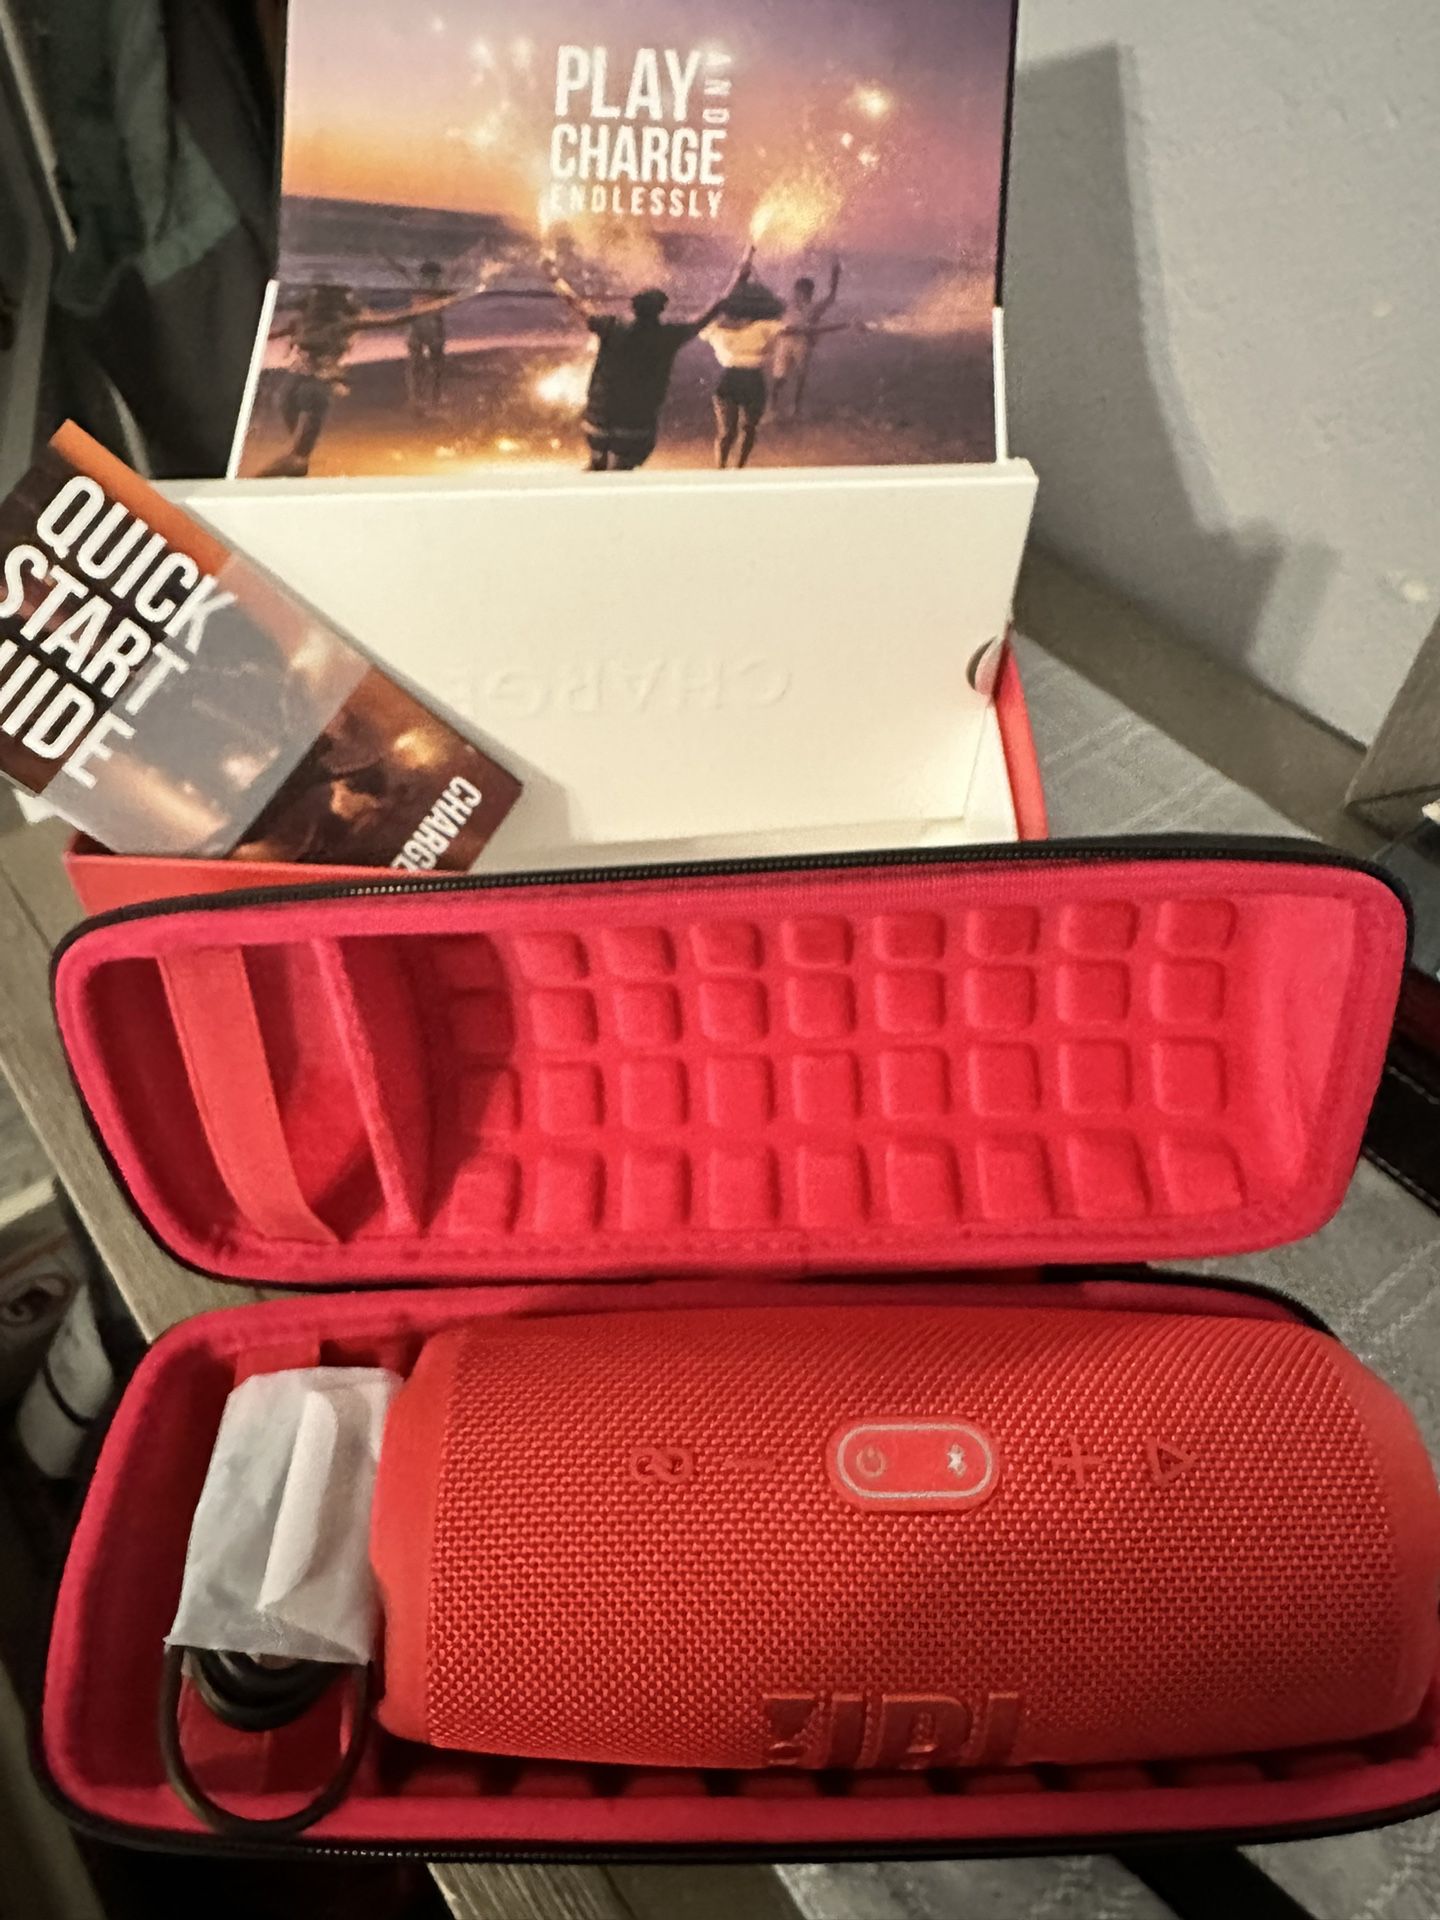 CHARGE 5 JBL Bluetooth Speaker With Carry On Case